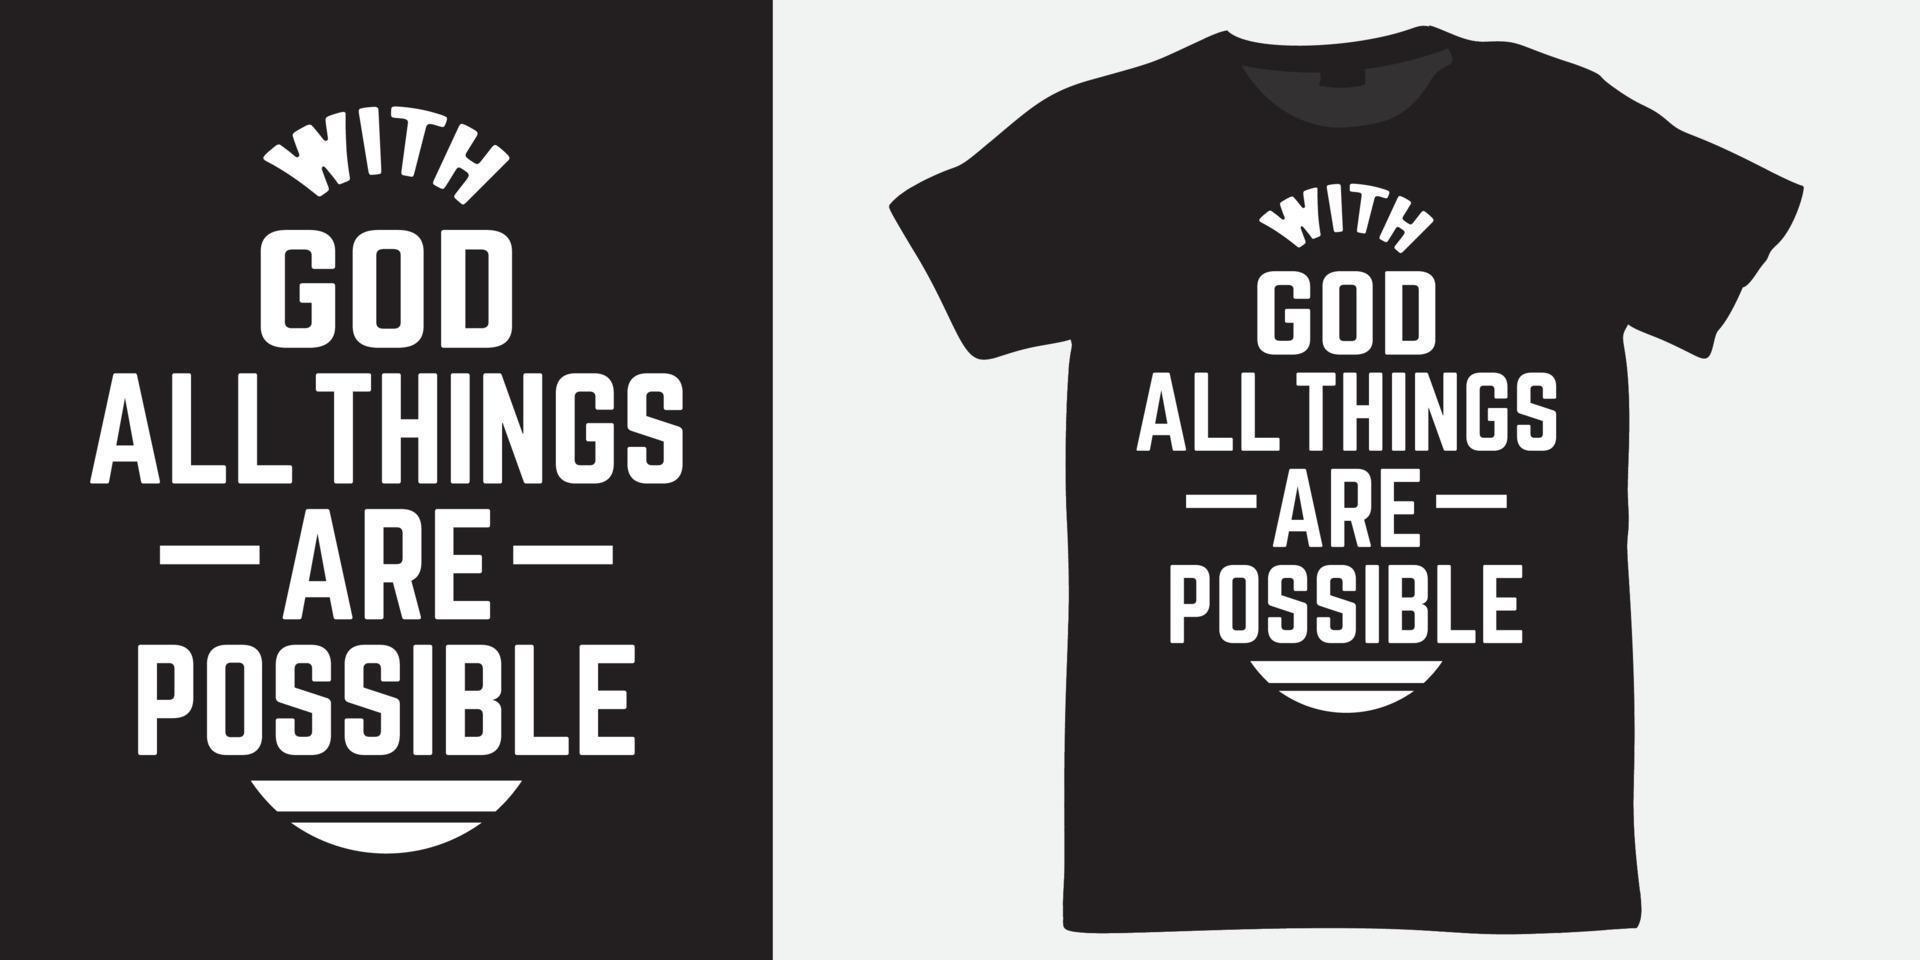 With God all things are possible lettering design for t shirt vector